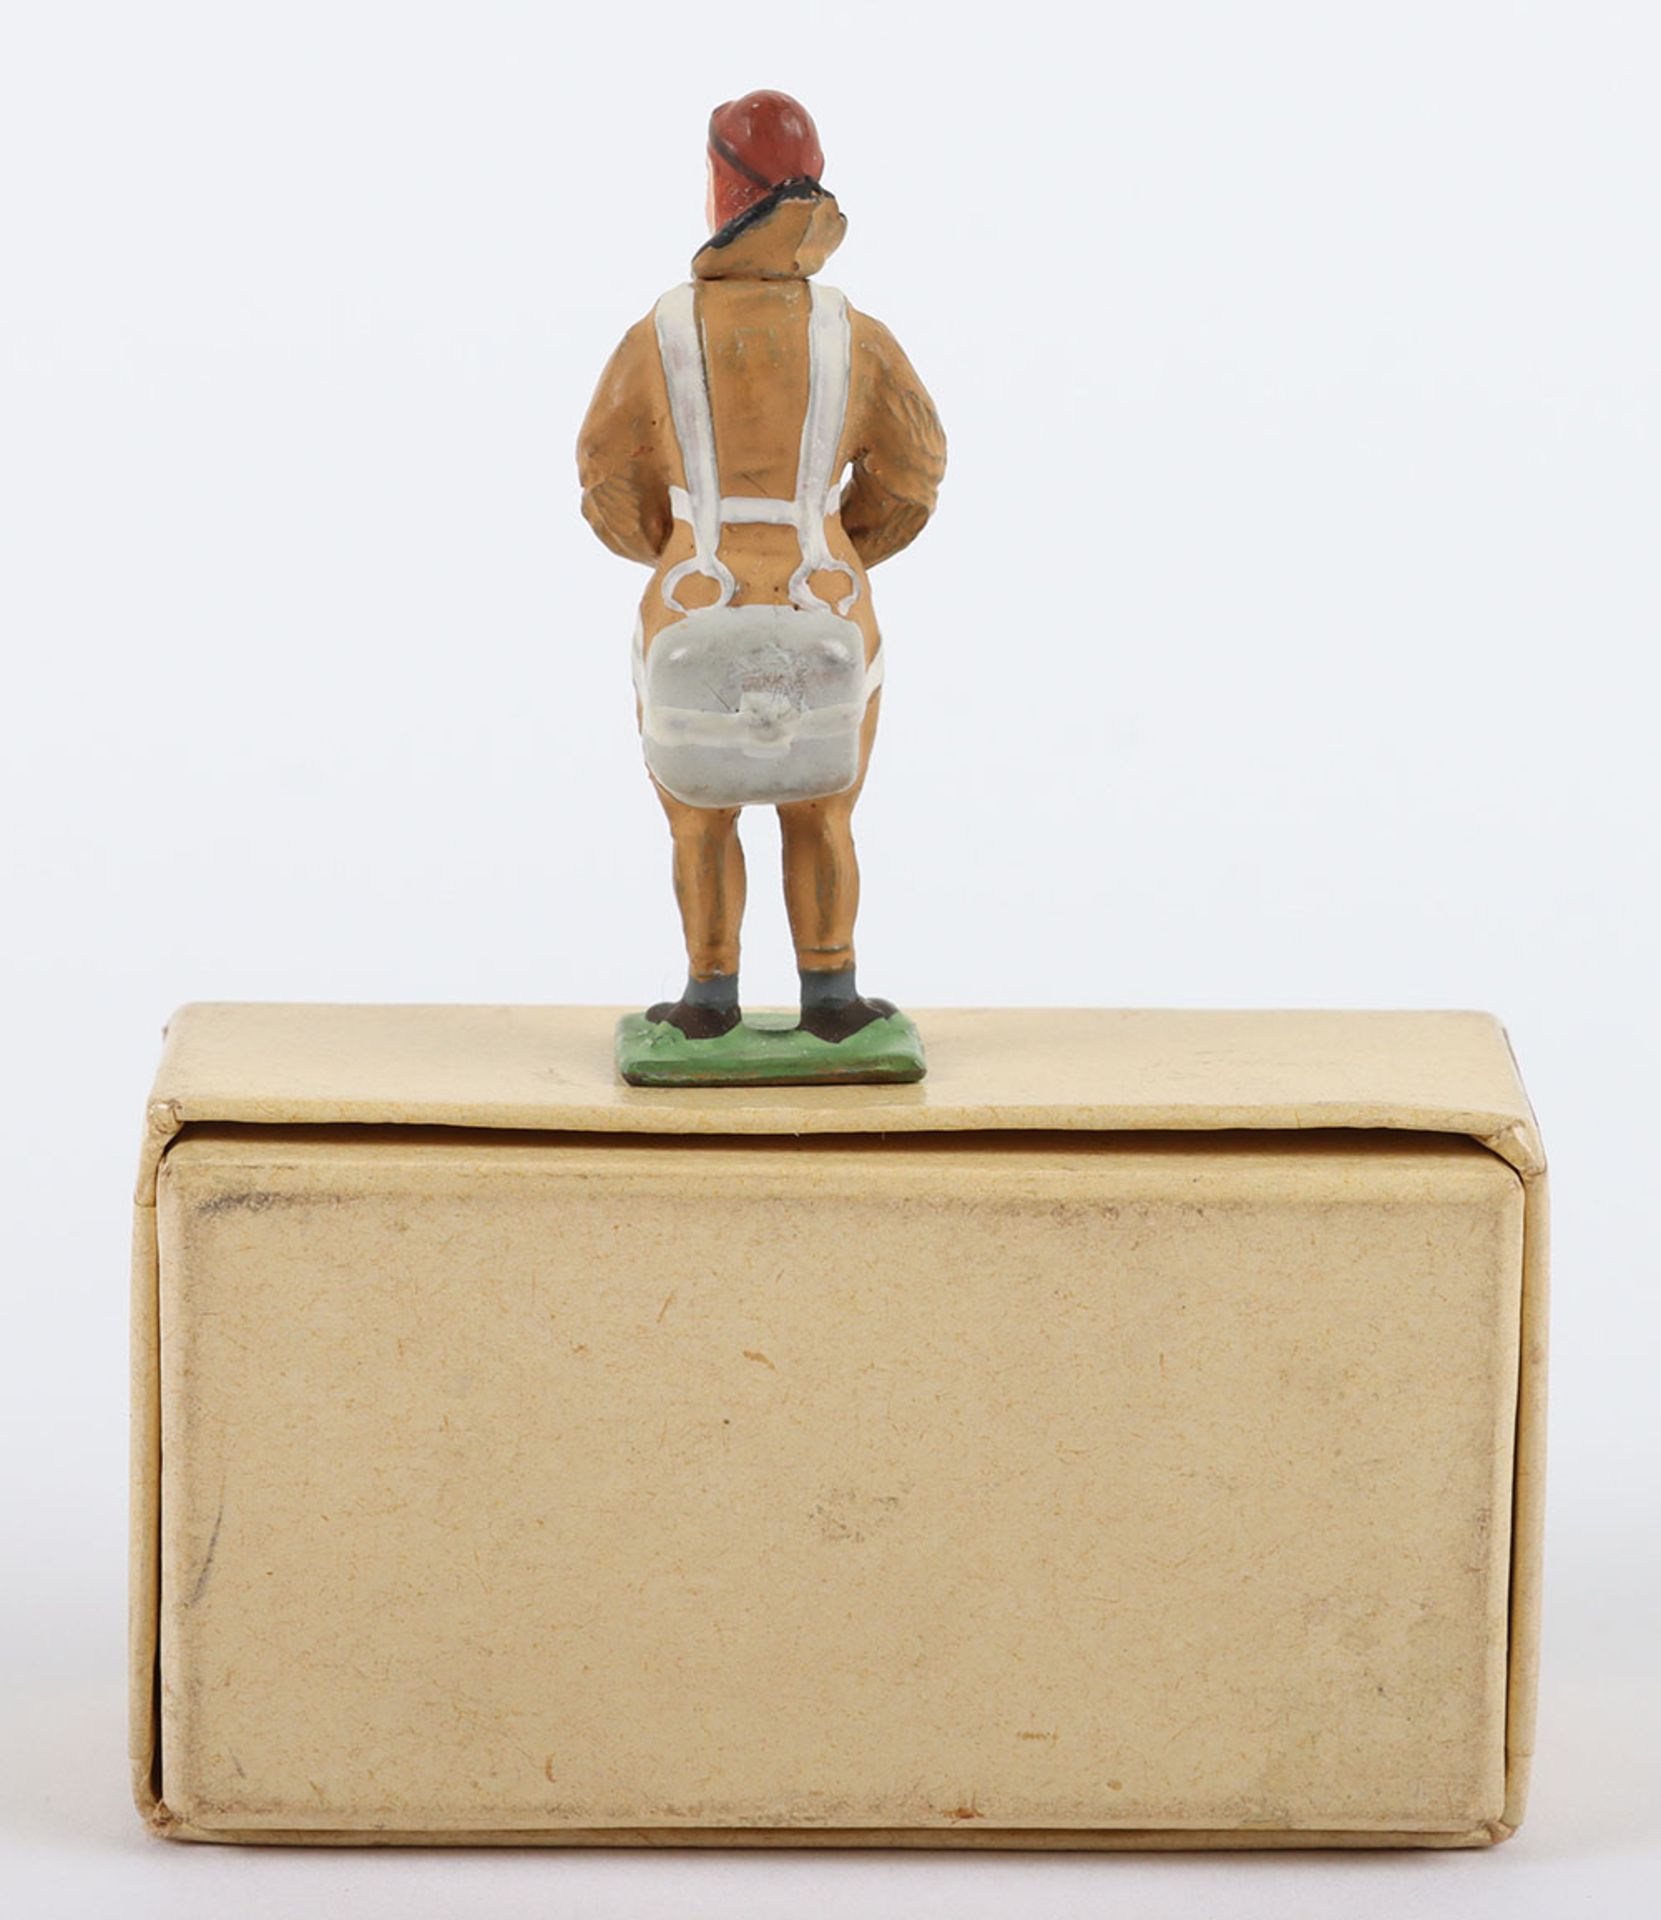 Rare boxed Heyde for Bassett-Lowke Personalty figure Amy Johnson, circa 1925 - Image 2 of 4